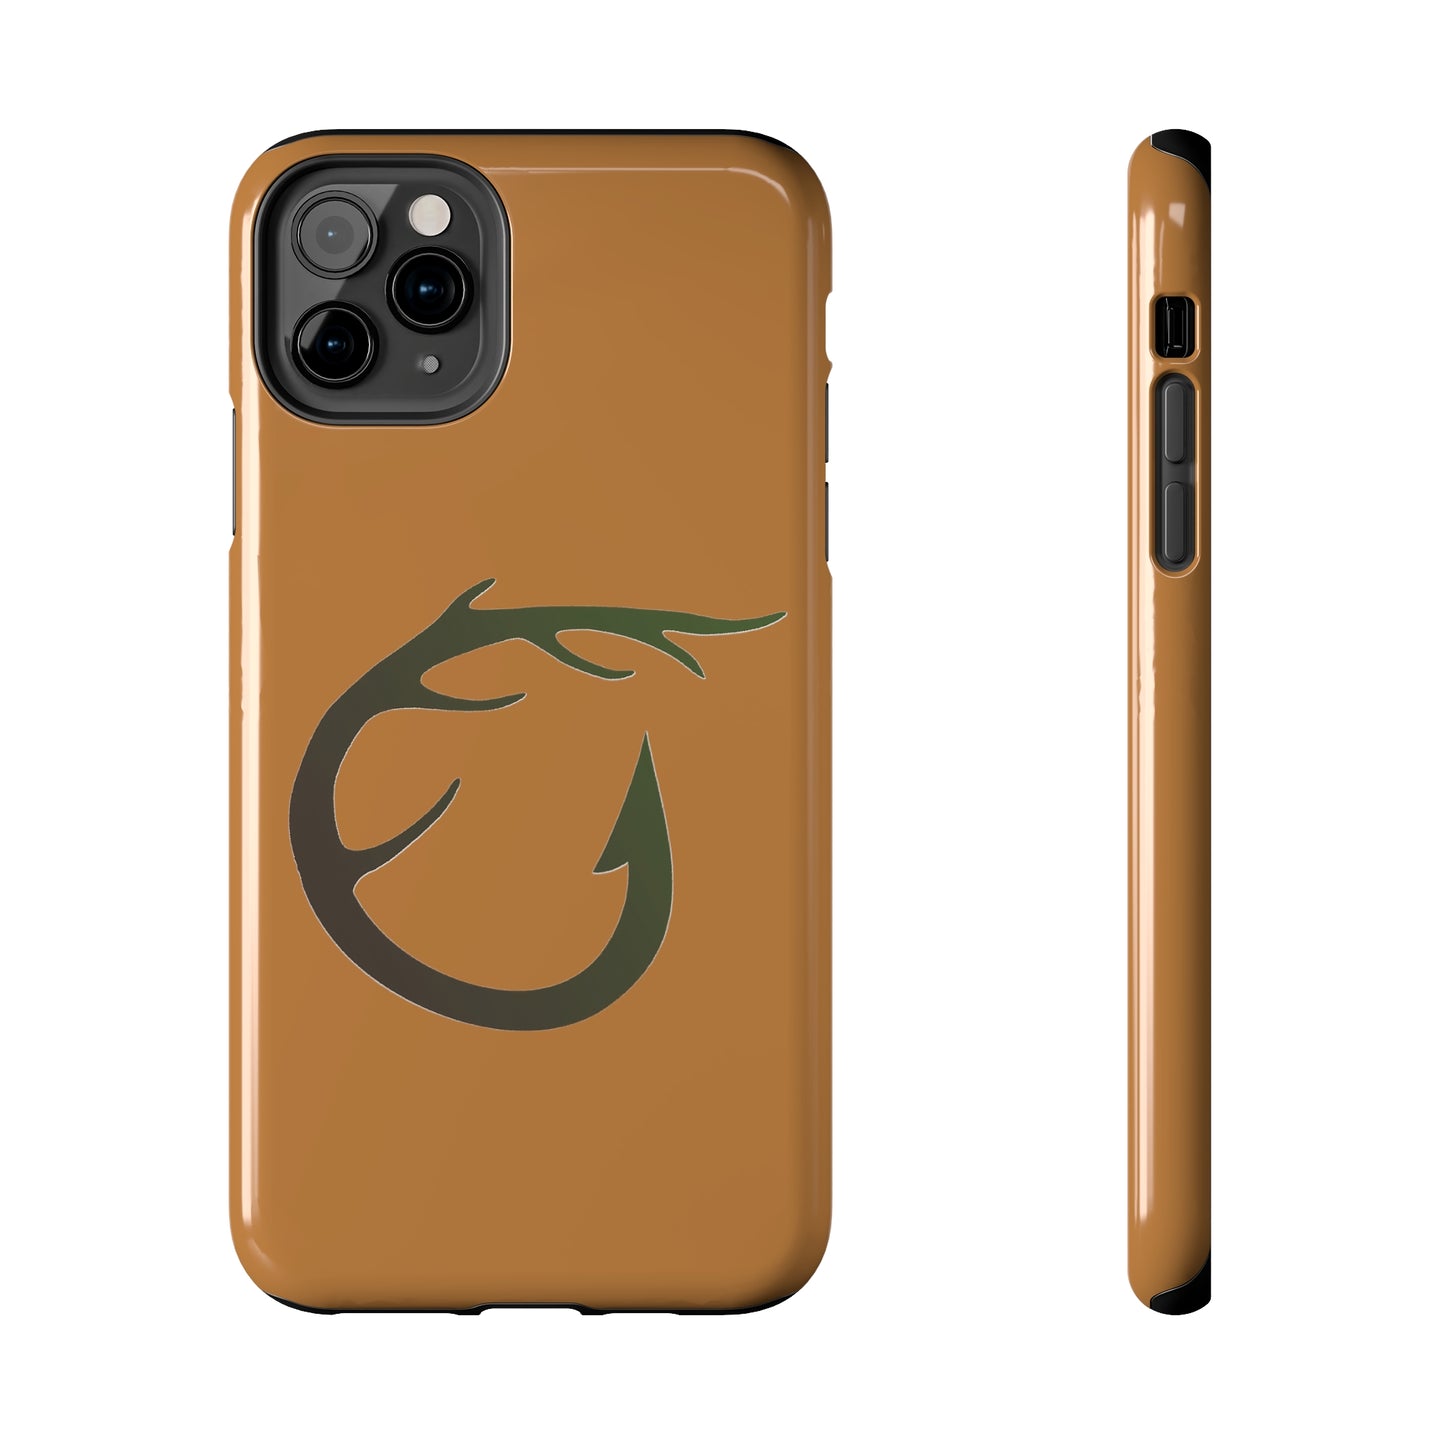 Huntin' & Fishin' Only / iPhone Case